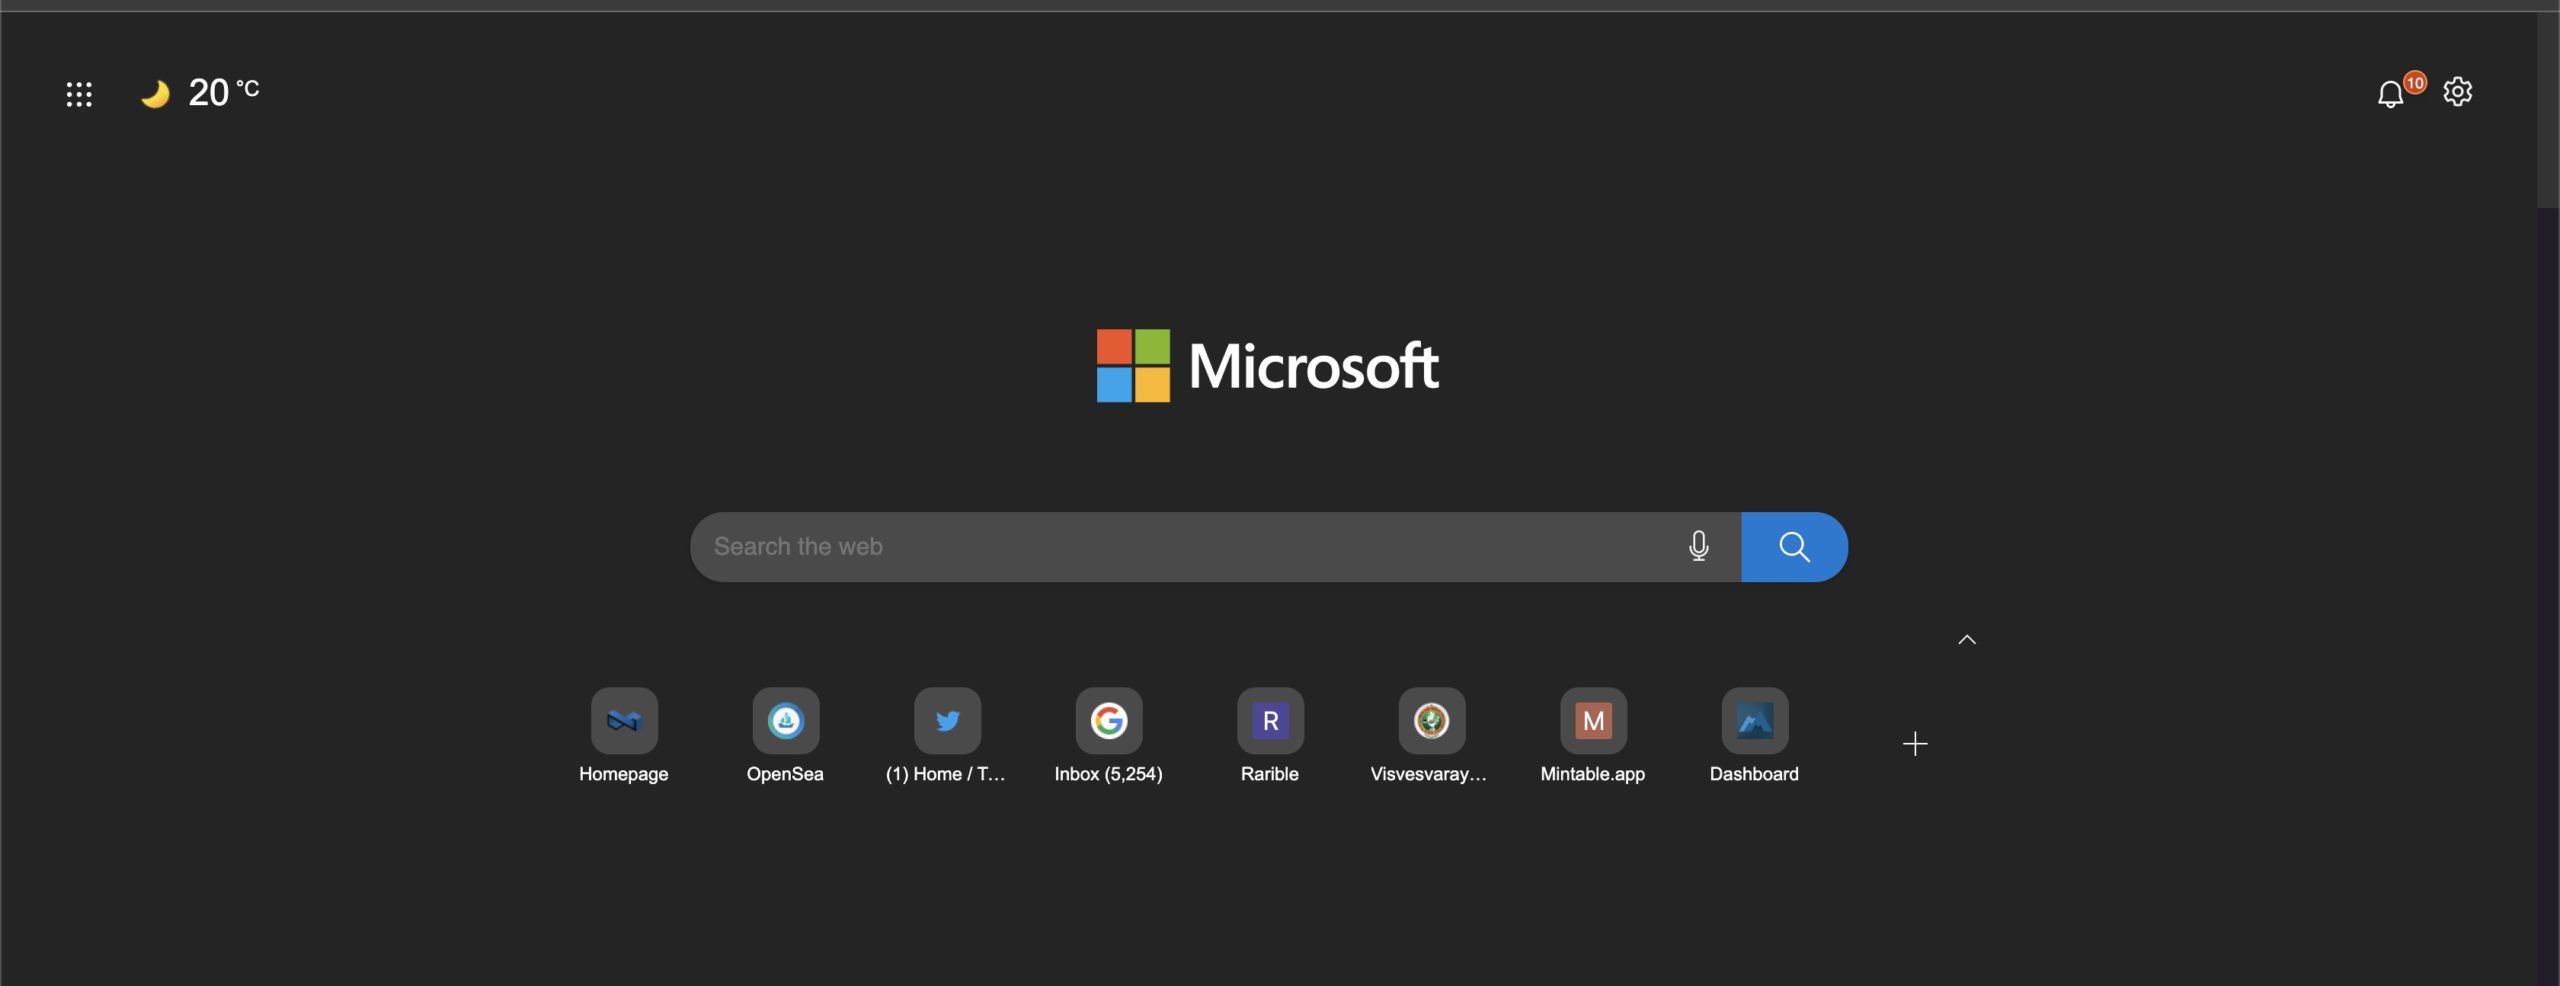 How to Determine Whether the Microsoft Edge Browser Is Up to Date